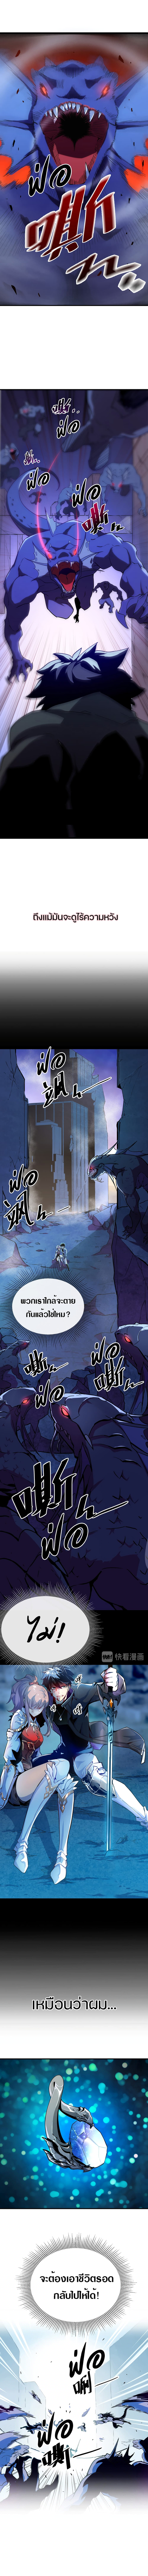 Rise From The Rubble เศษซากวันสิ้นโลก 0-0